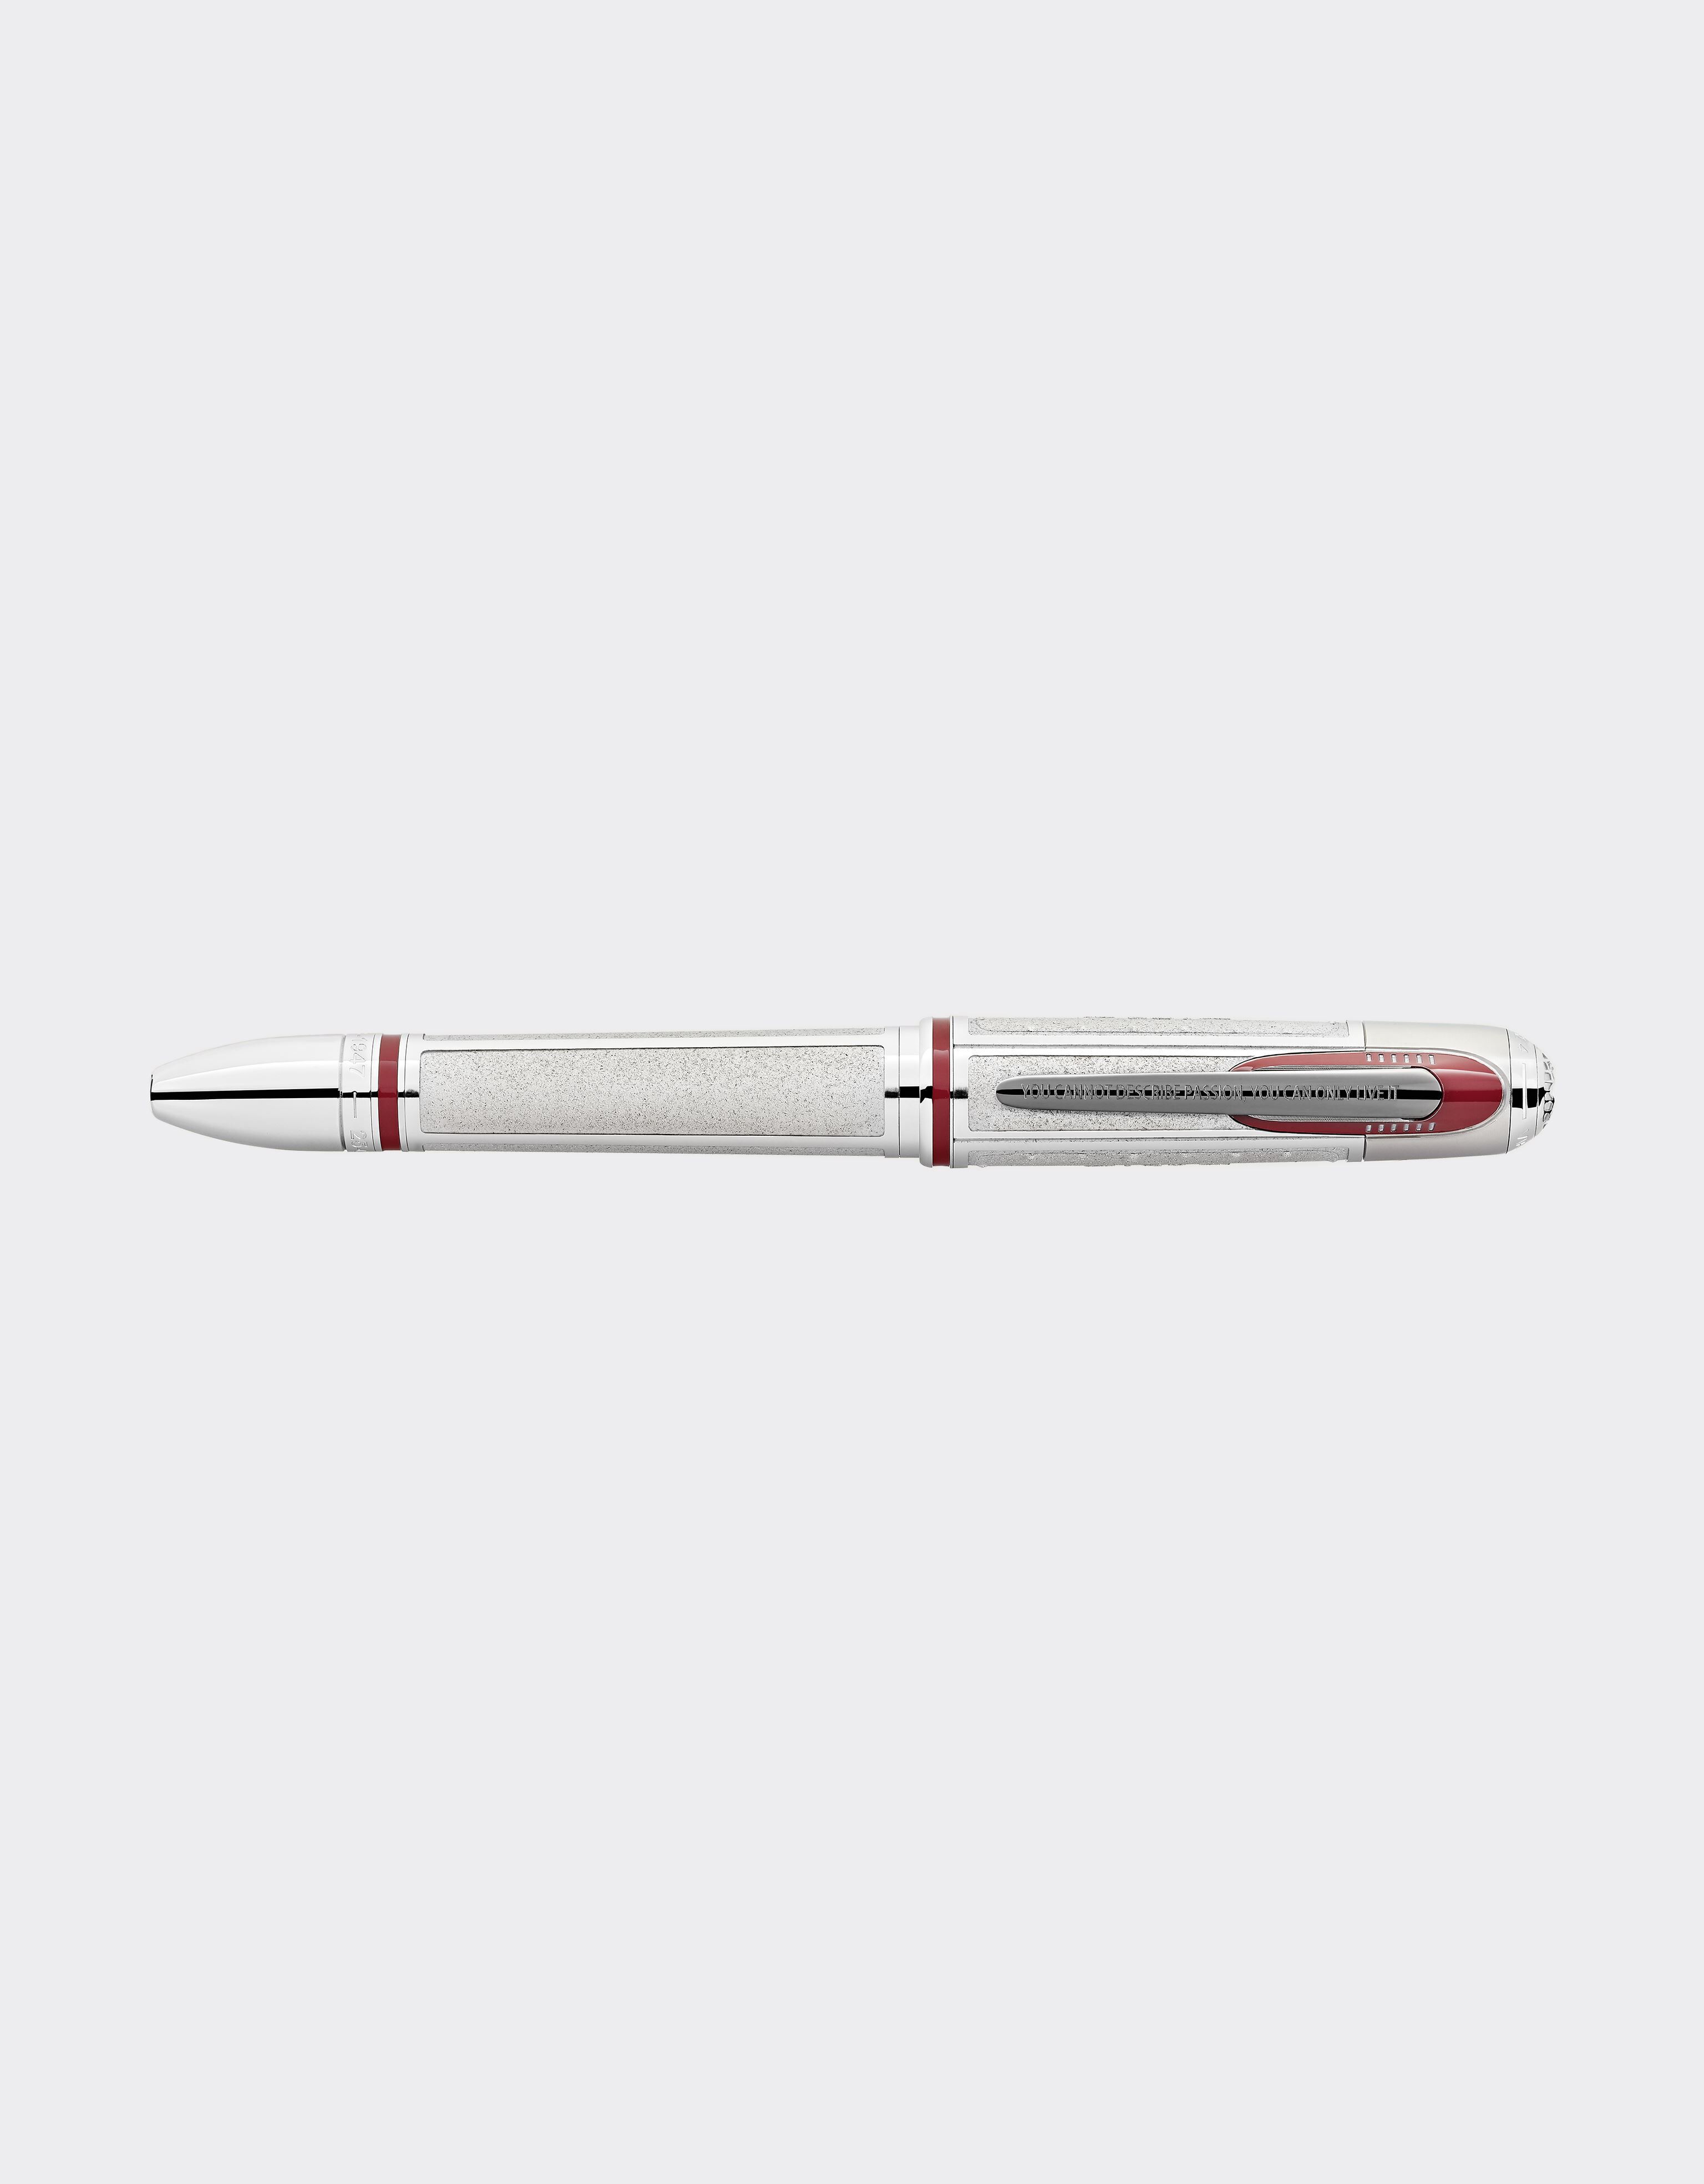 ${brand} Penna roller Montblanc Great Characters Enzo Ferrari Limited Edition 1898 ${colorDescription} ${masterID}